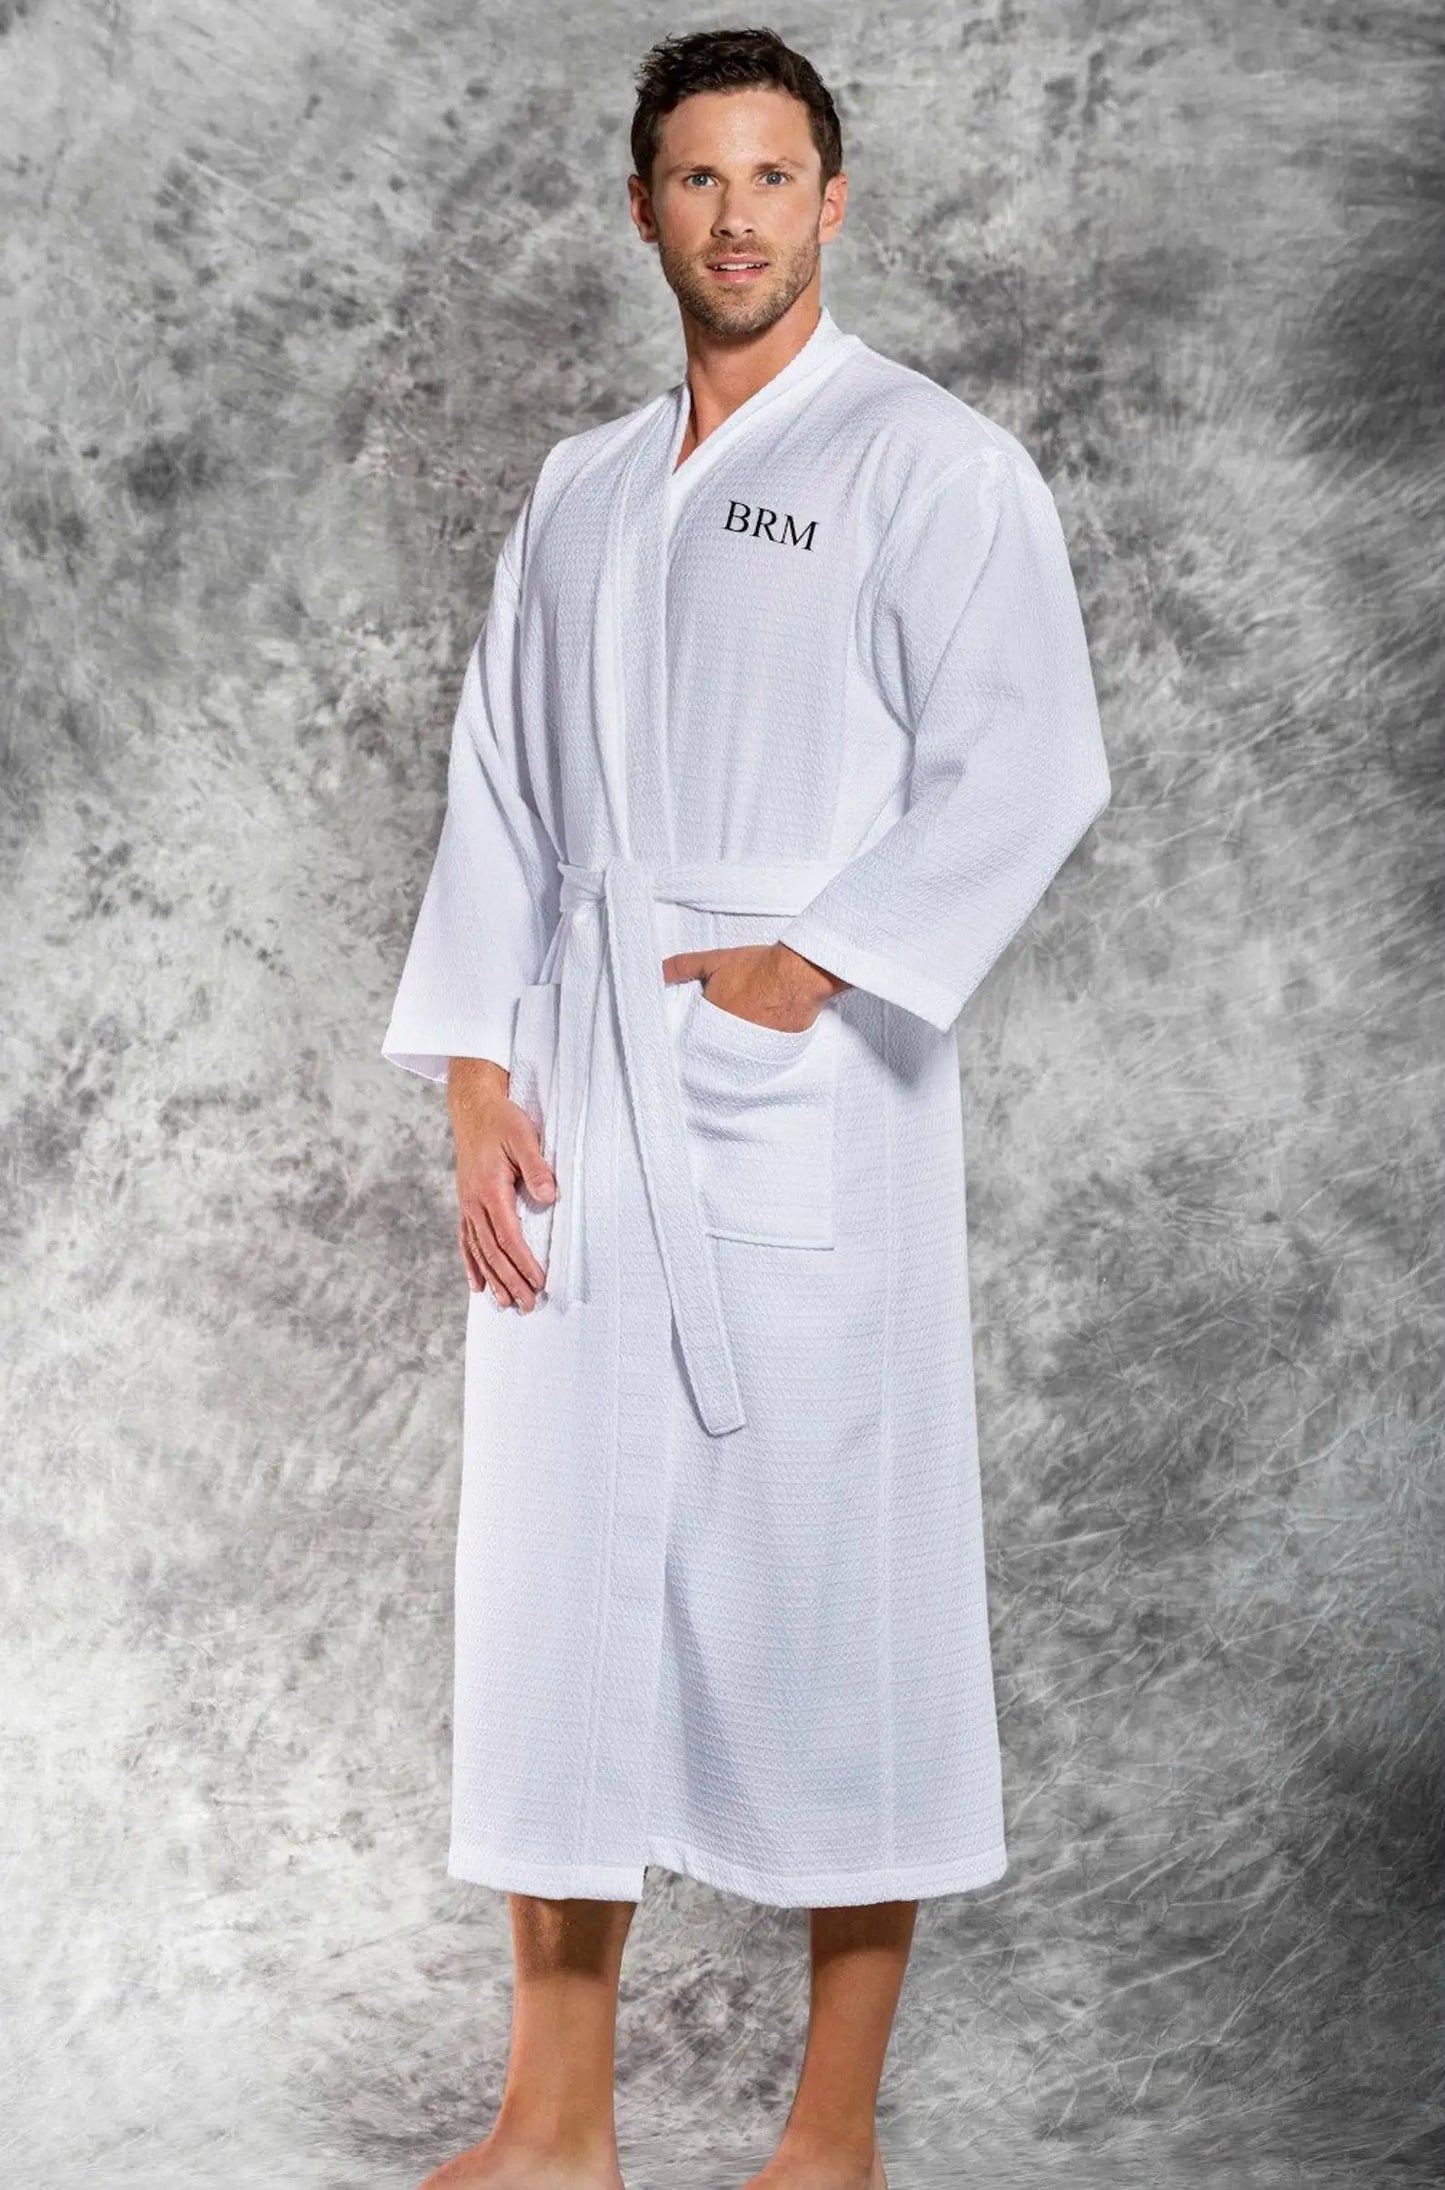 Custom Men's Monogrammed White Waffle Robe Embroidered Personalized Bathrobes for Men Father's Day Valentine's Day Gift for Him